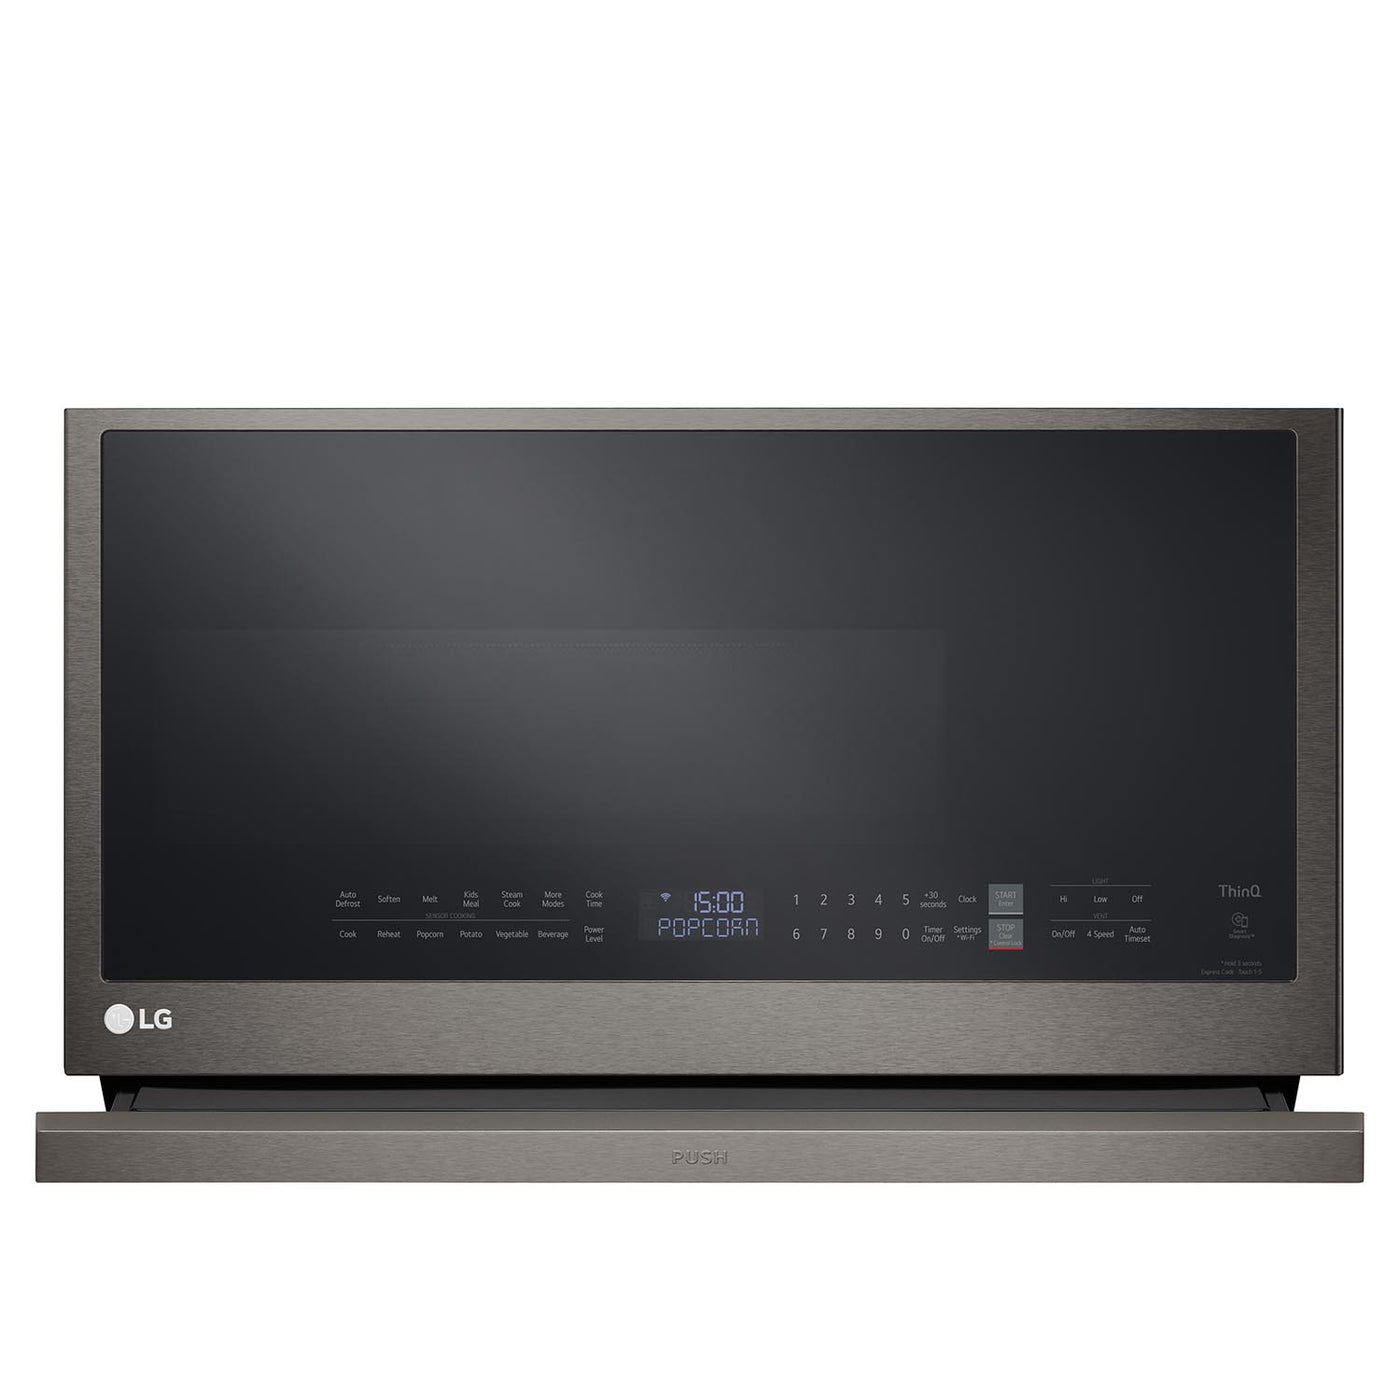 LG Black Stainless Smart Wi-Fi Enabled Over-the-Range Microwave with ExtendaVent® 2.0 & EasyClean® (2.1 cu. ft.) - MVEL2137D